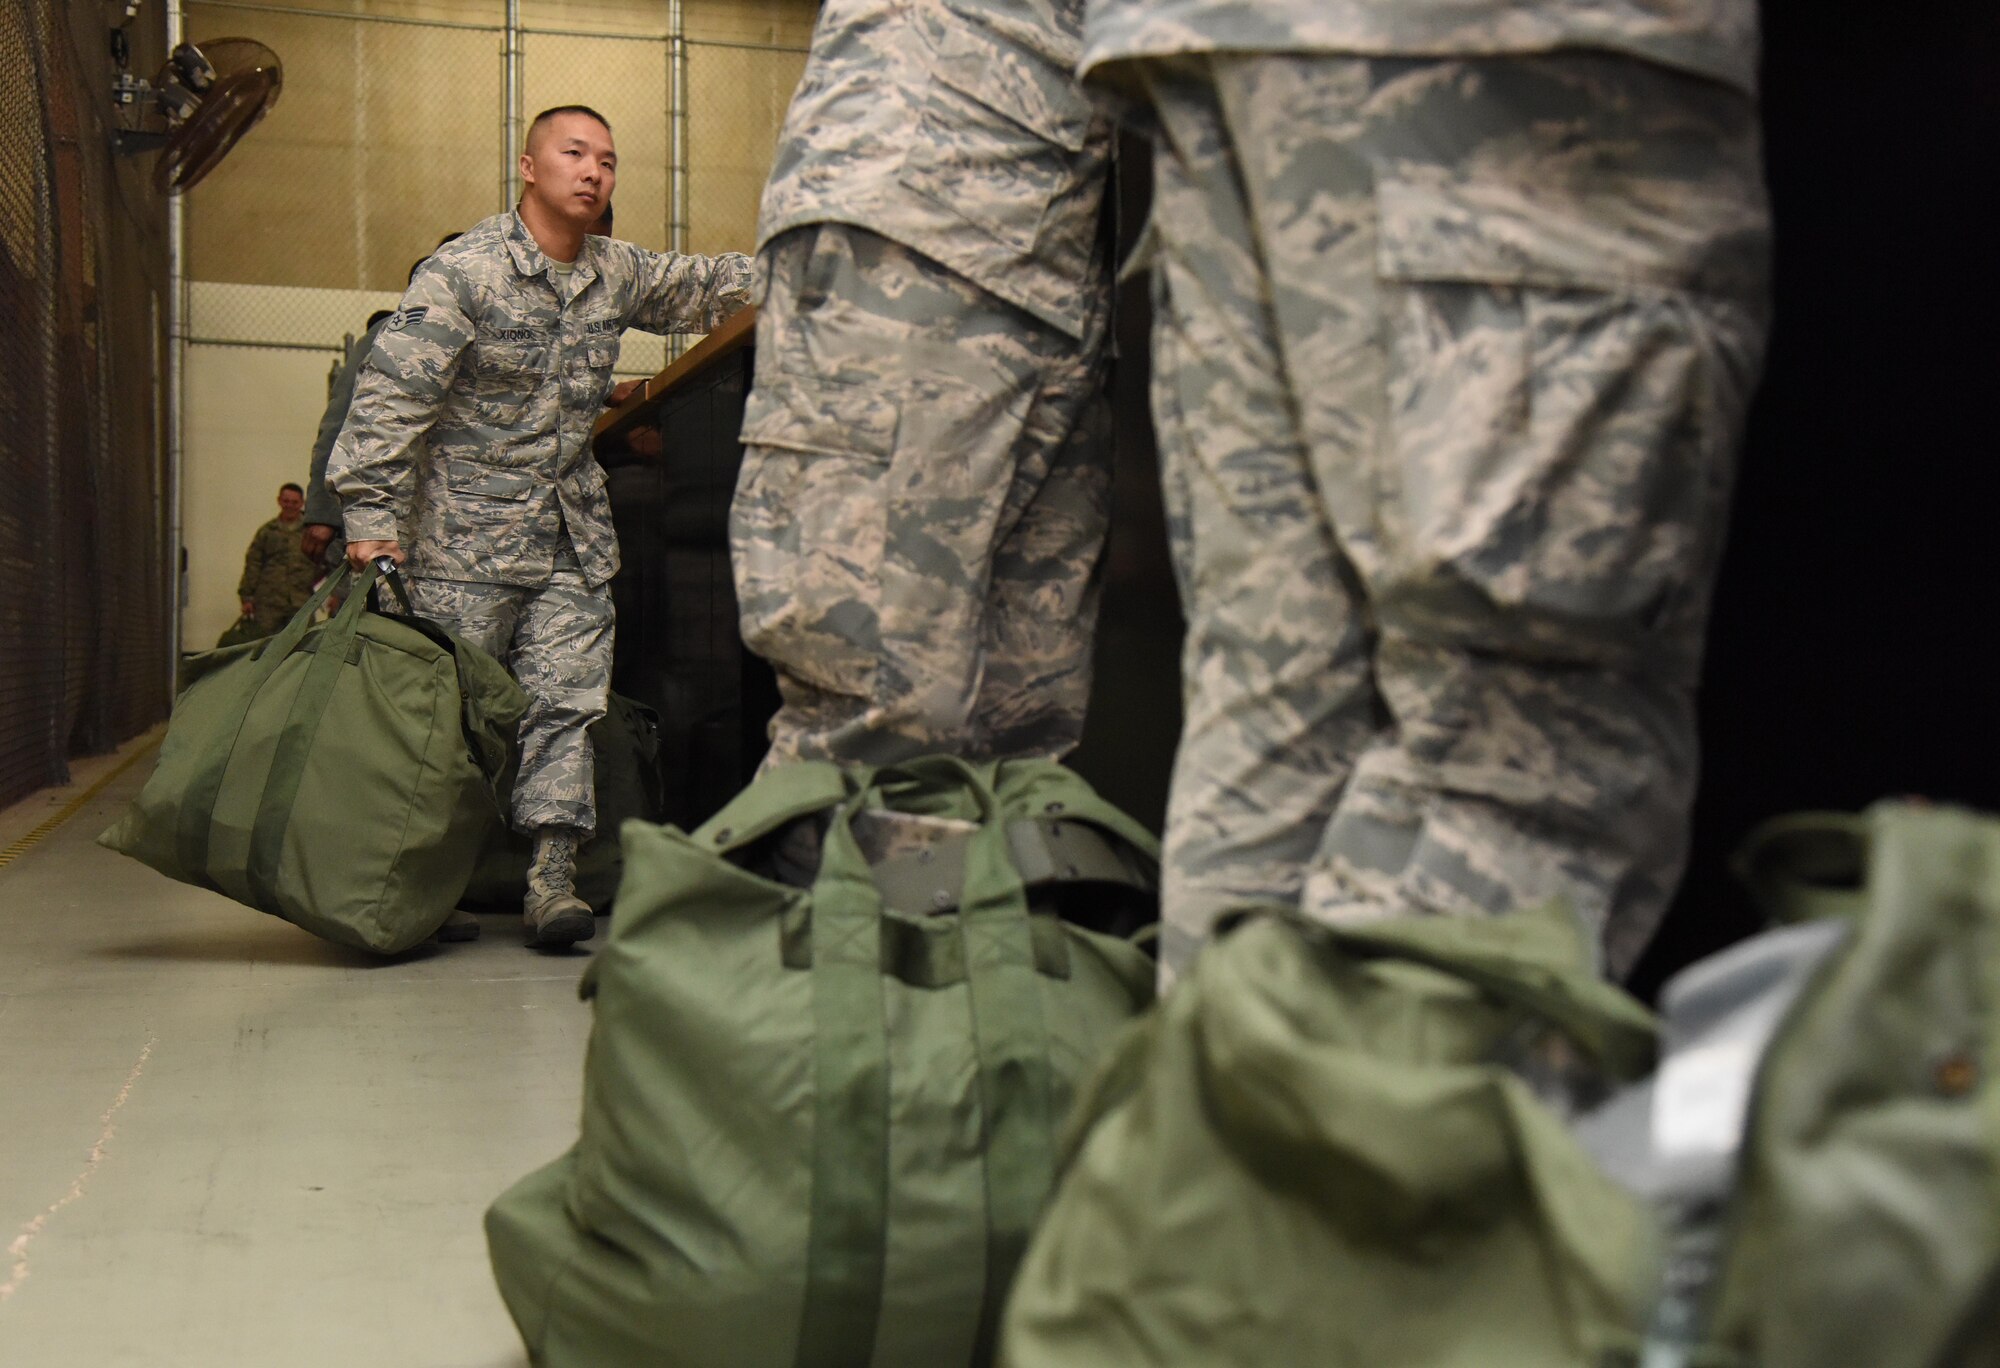 Senior Airman Xeng Xiong, 81st Force Support Squadron technician, receives mobility bag items at the supply warehouse during a deployment exercise Dec. 8, 2016, on Keesler Air Force Base, Miss. The exercise scenario tested the mission readiness of Team Keesler for simultaneous world-wide deployments. (U.S. Air Force photo by Kemberly Groue)